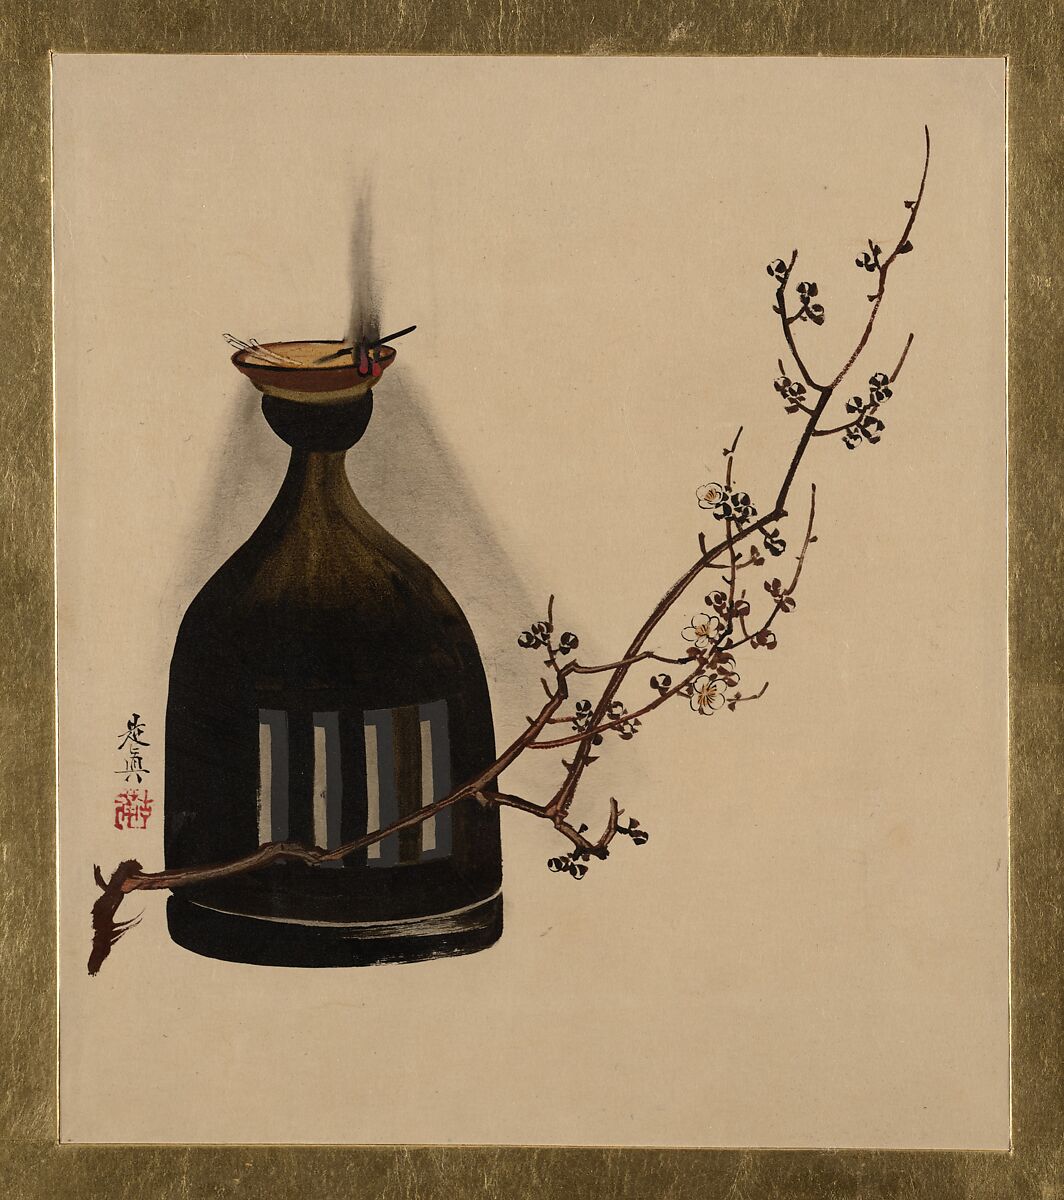 Lacquer Paintings of Various Subjects: Plum Branch with Oil Lamp, Shibata Zeshin (Japanese, 1807–1891), Lacquer on paper, Japan 